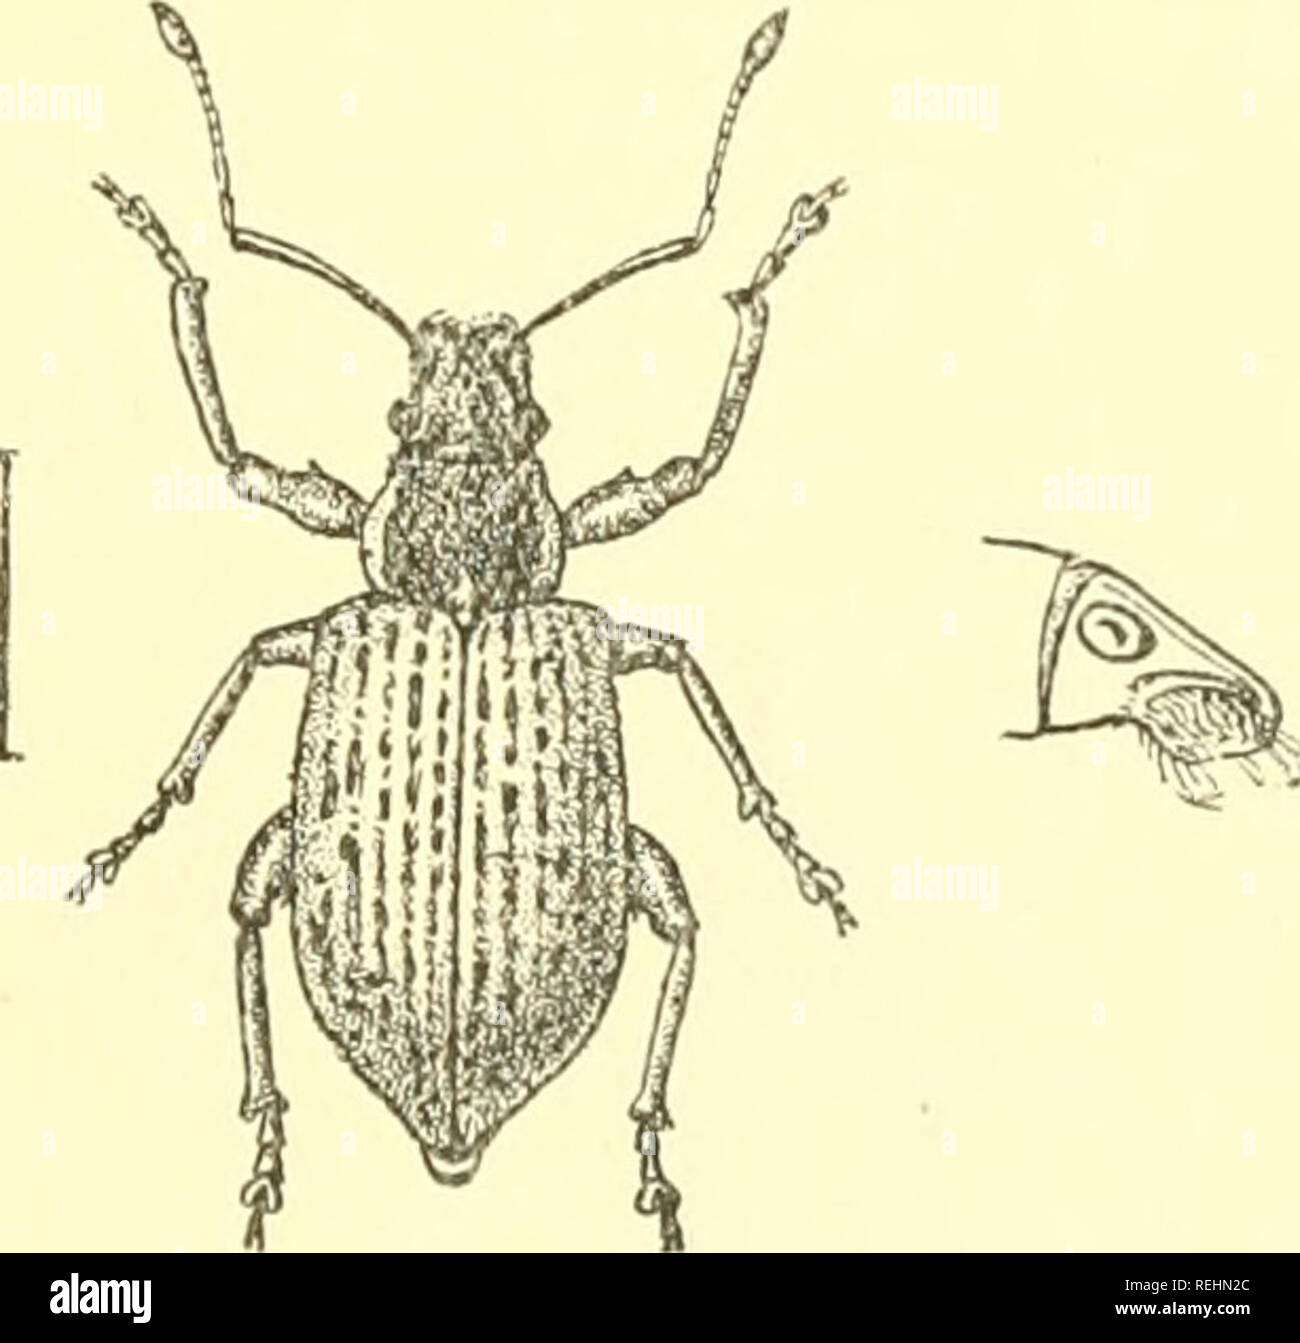 . Coleoptera. Rhynchophora:-Curculionidæ,. Curculionidae. MYLLOCERUS. 337 distinguished, among other characters, by having only one tooth on the posterior femora instead of three. Mr. Lefroy informs me that this species devours the vouug leaves of the mango tree. 315. Mylloceriis transmarinus, Hhst. Curculio transinariims, Ilerbst,* Kilf. vi, 1795, p. 213, pi. 75, f. 1. Myllocervs mvsculus, Bohemaii,* Schijnh. Gen. Cure, ii, 1834, p. 429 (n. syn.). Myllocerus heru/alensis, Desbrochers des Leges,* C. R. Soc. Ent. Belg. XXXV, 1891, p. ccclvi (n. syn.). Myllocerus molar ins, Faust,* Stett. Ent. Z Stock Photo